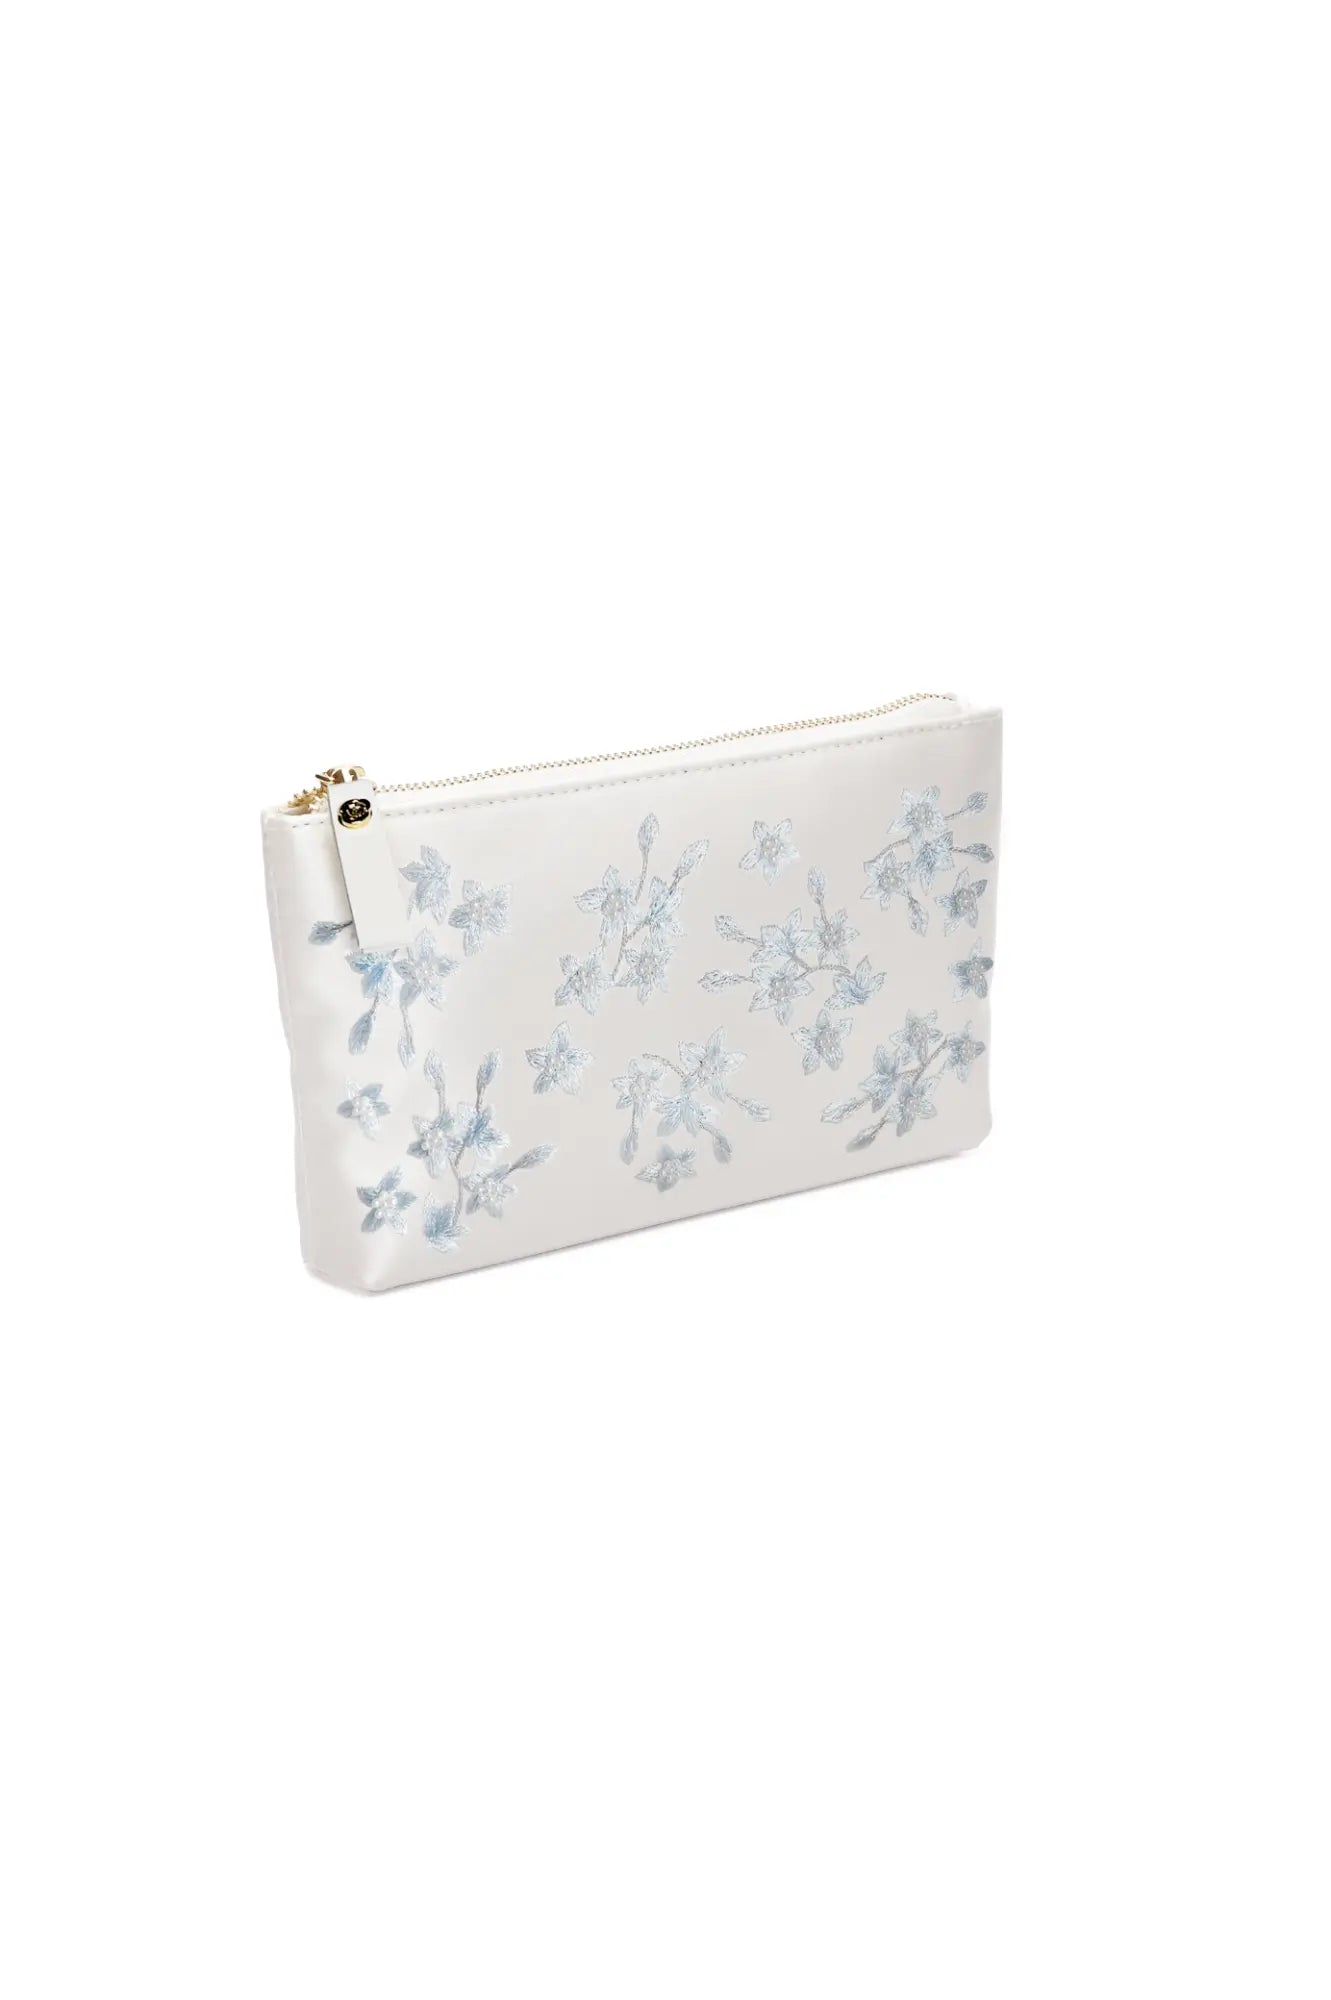 The Bella Rosa Collection Mia Acrylic Clutch with Ivory Pouch Blue Flowers featuring a zipper closure.